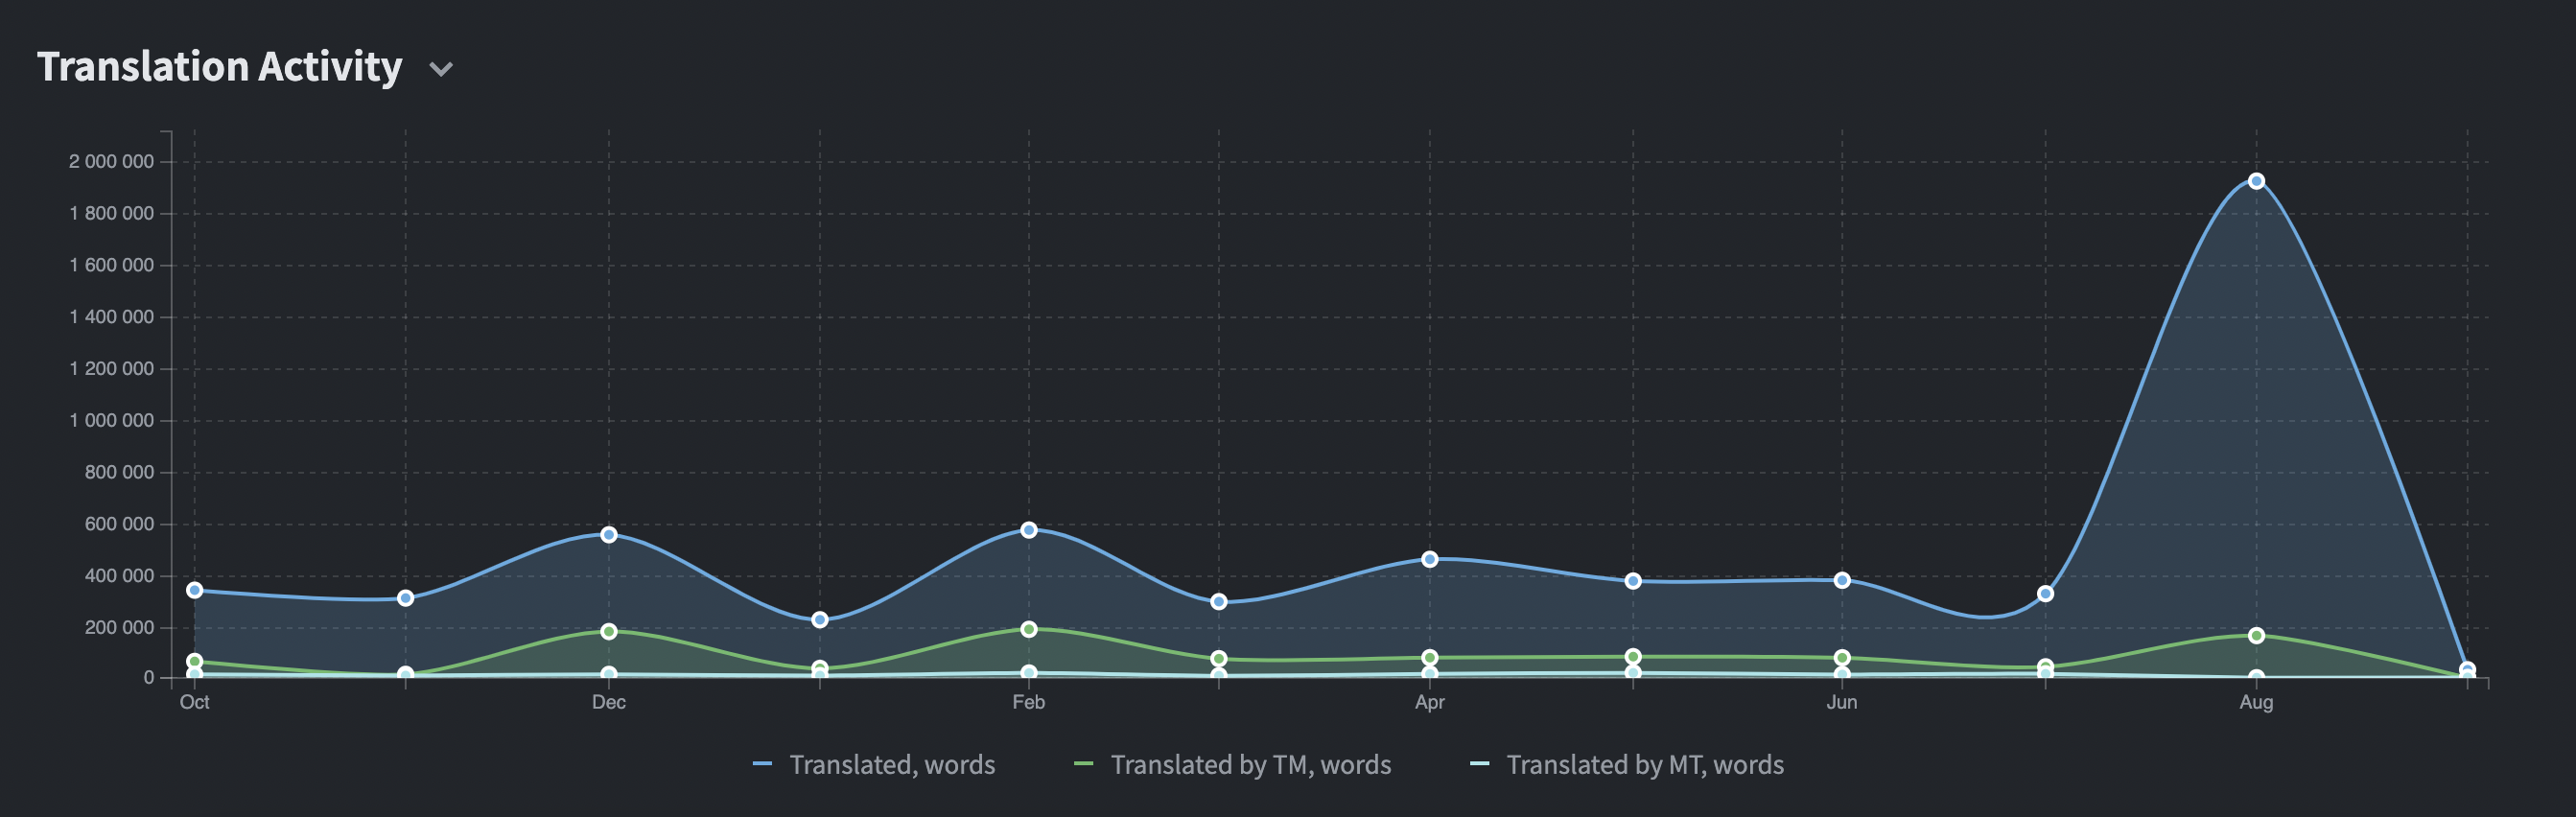 Translation activity during the past 12 months